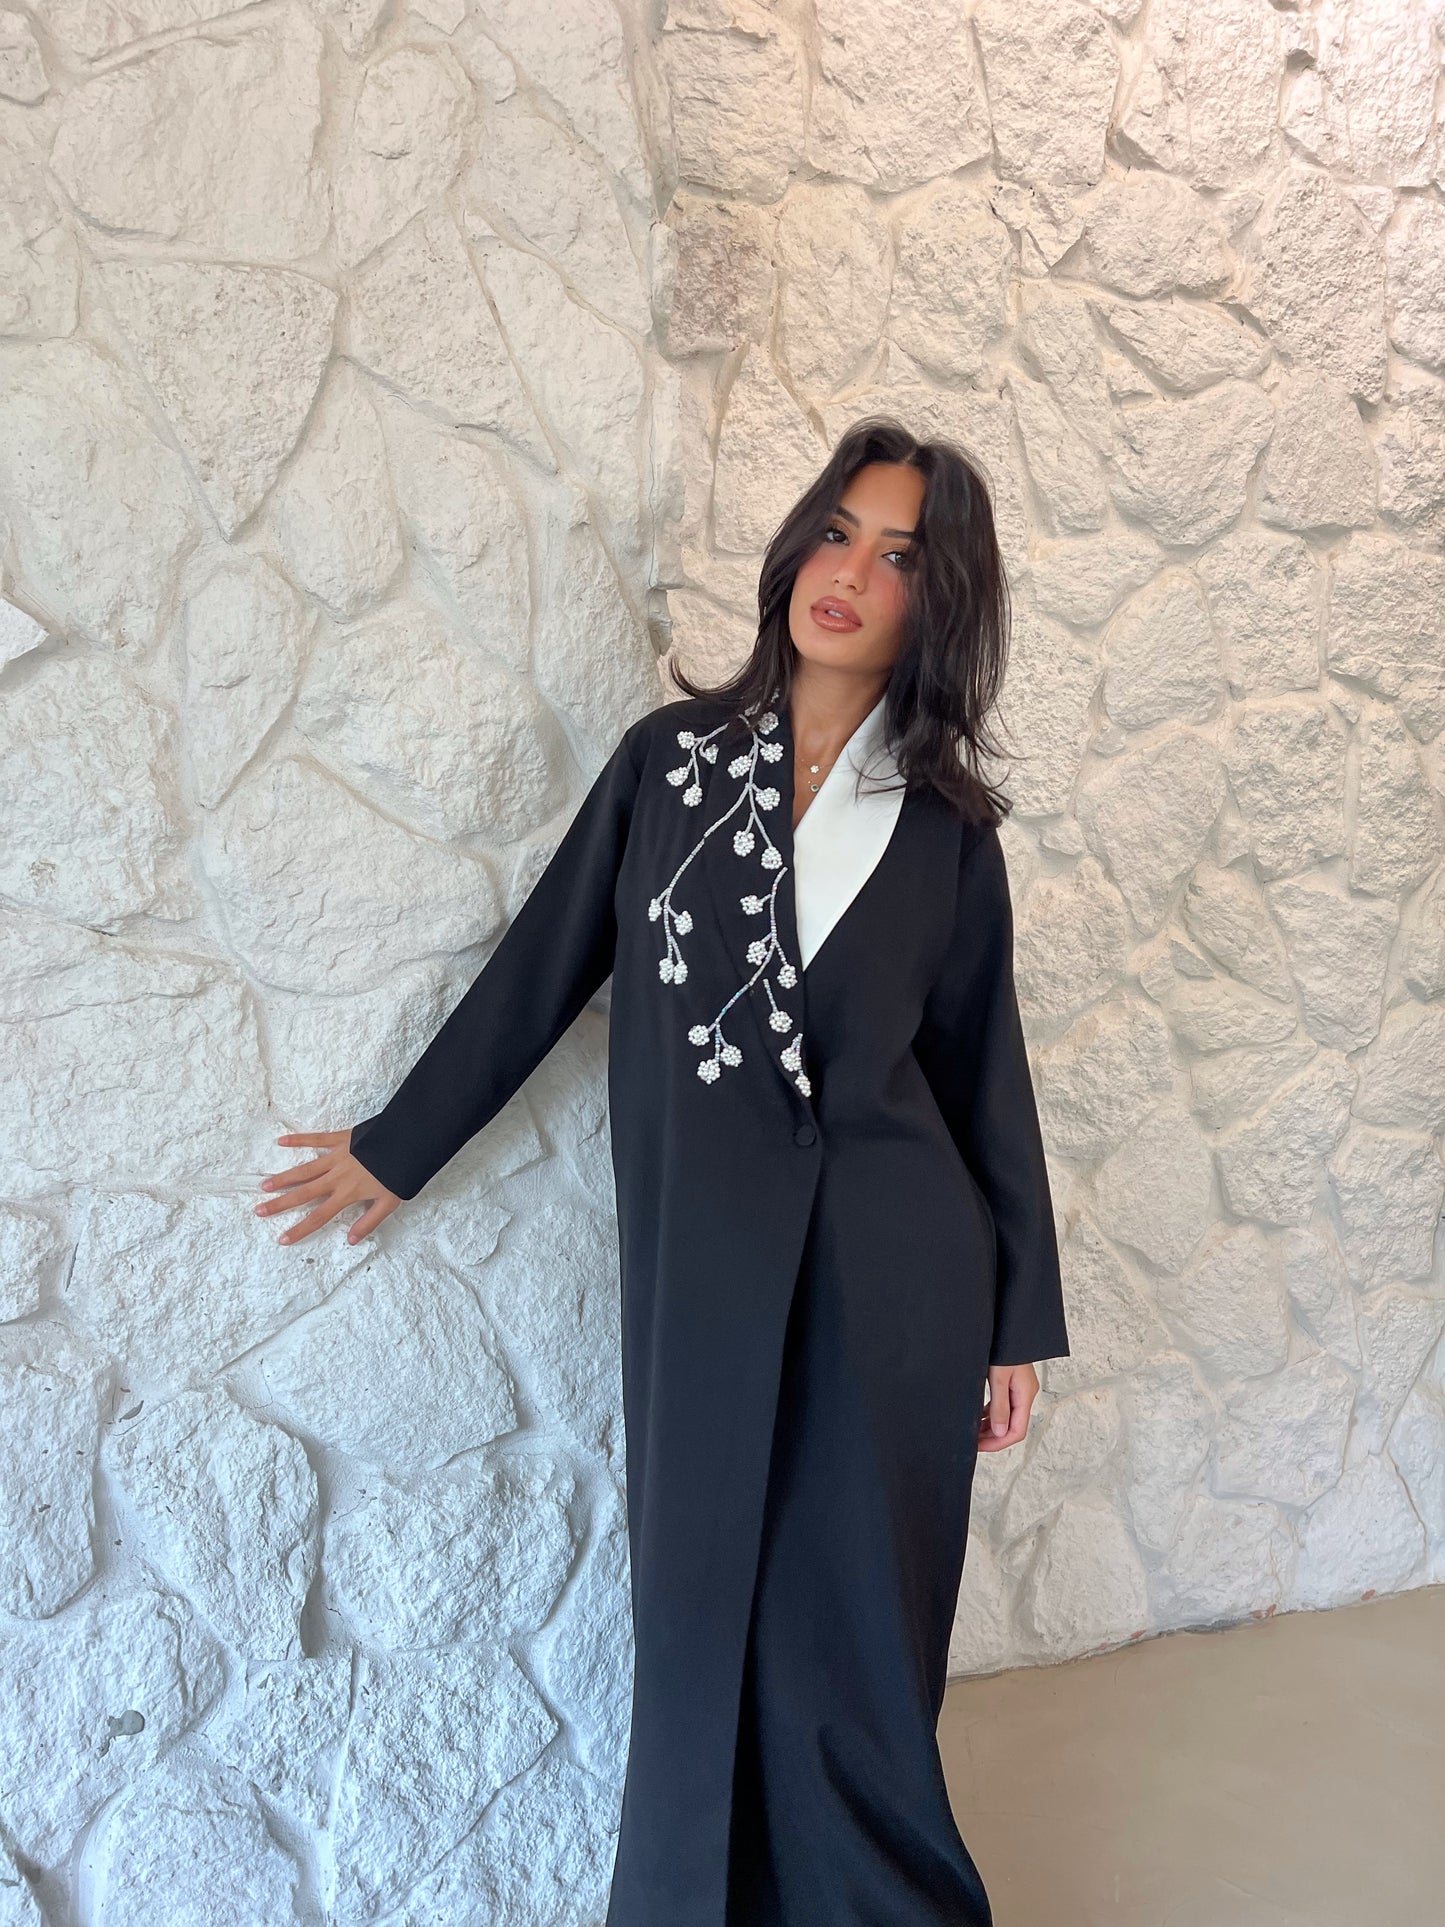 She's That Girl - Chic Beaded Suit - Online Shopping - The Untitled Project